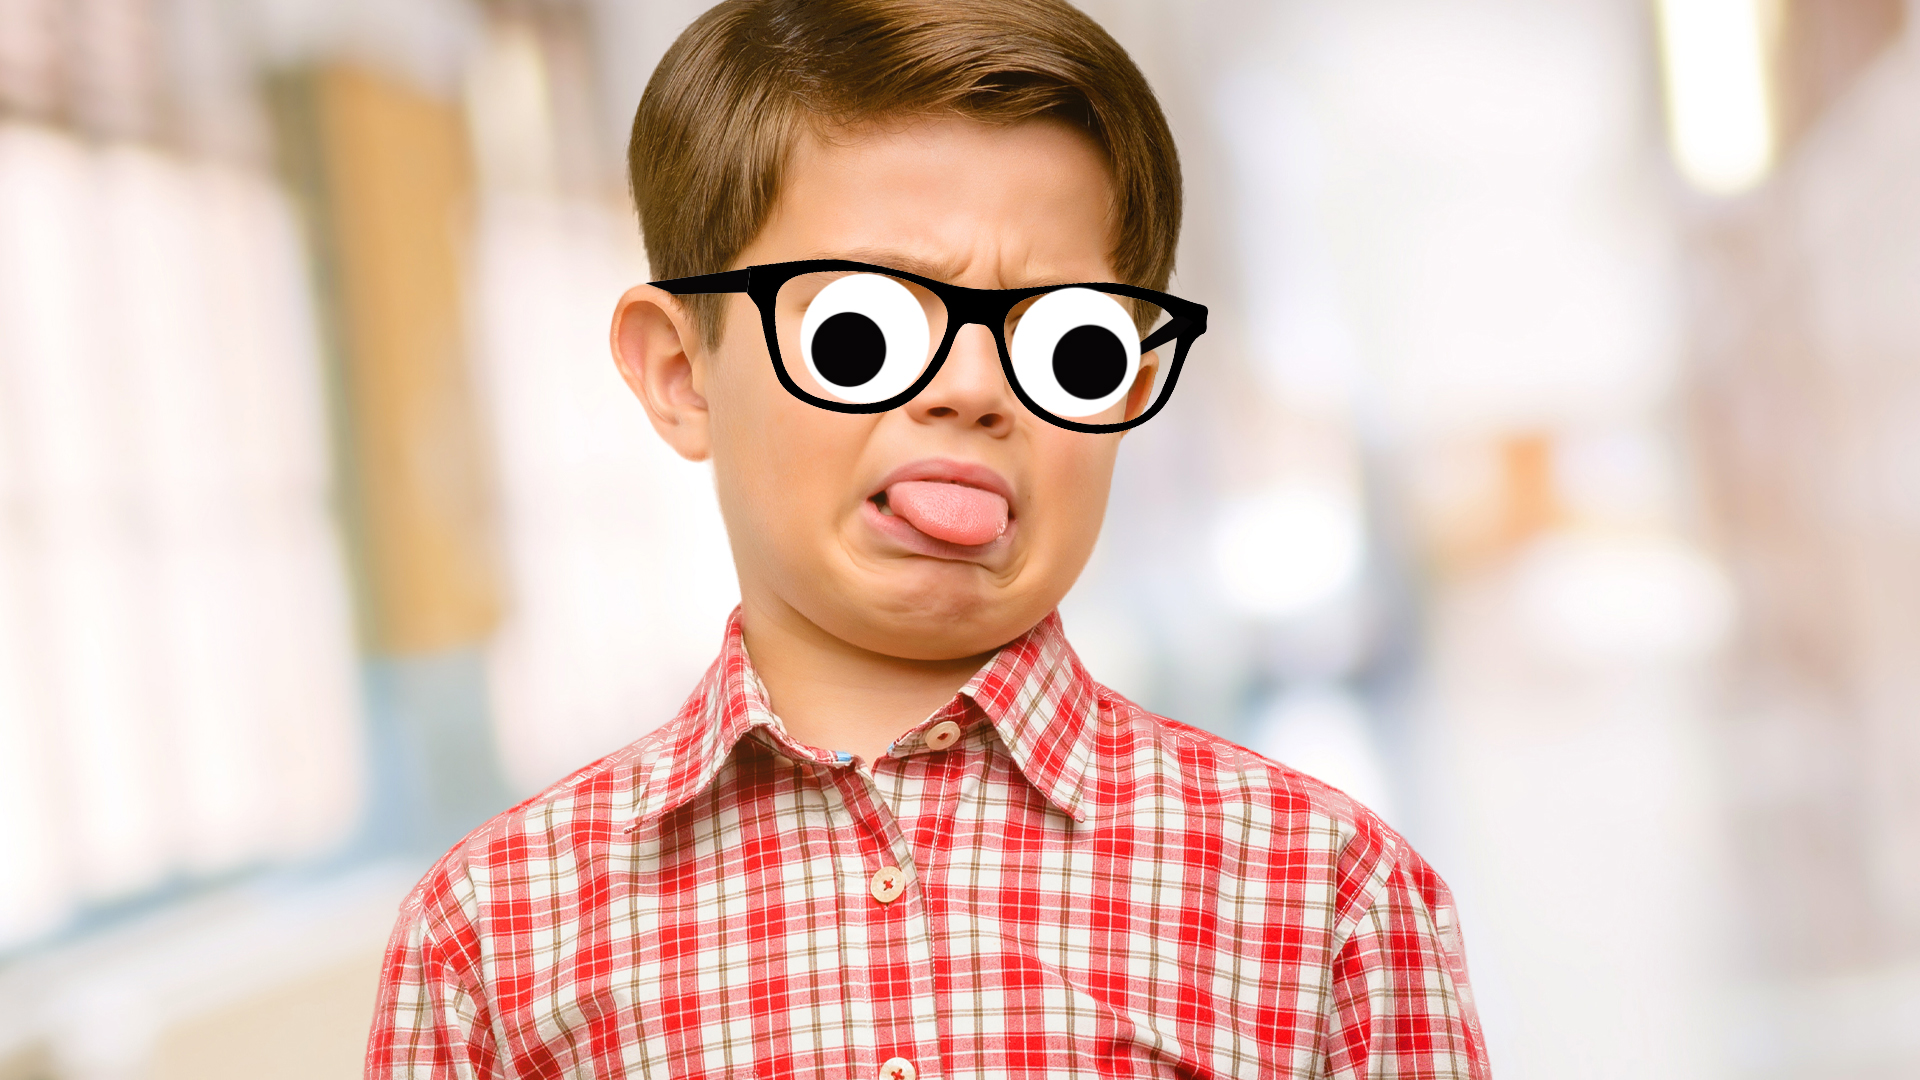 A child sticking their tongue out